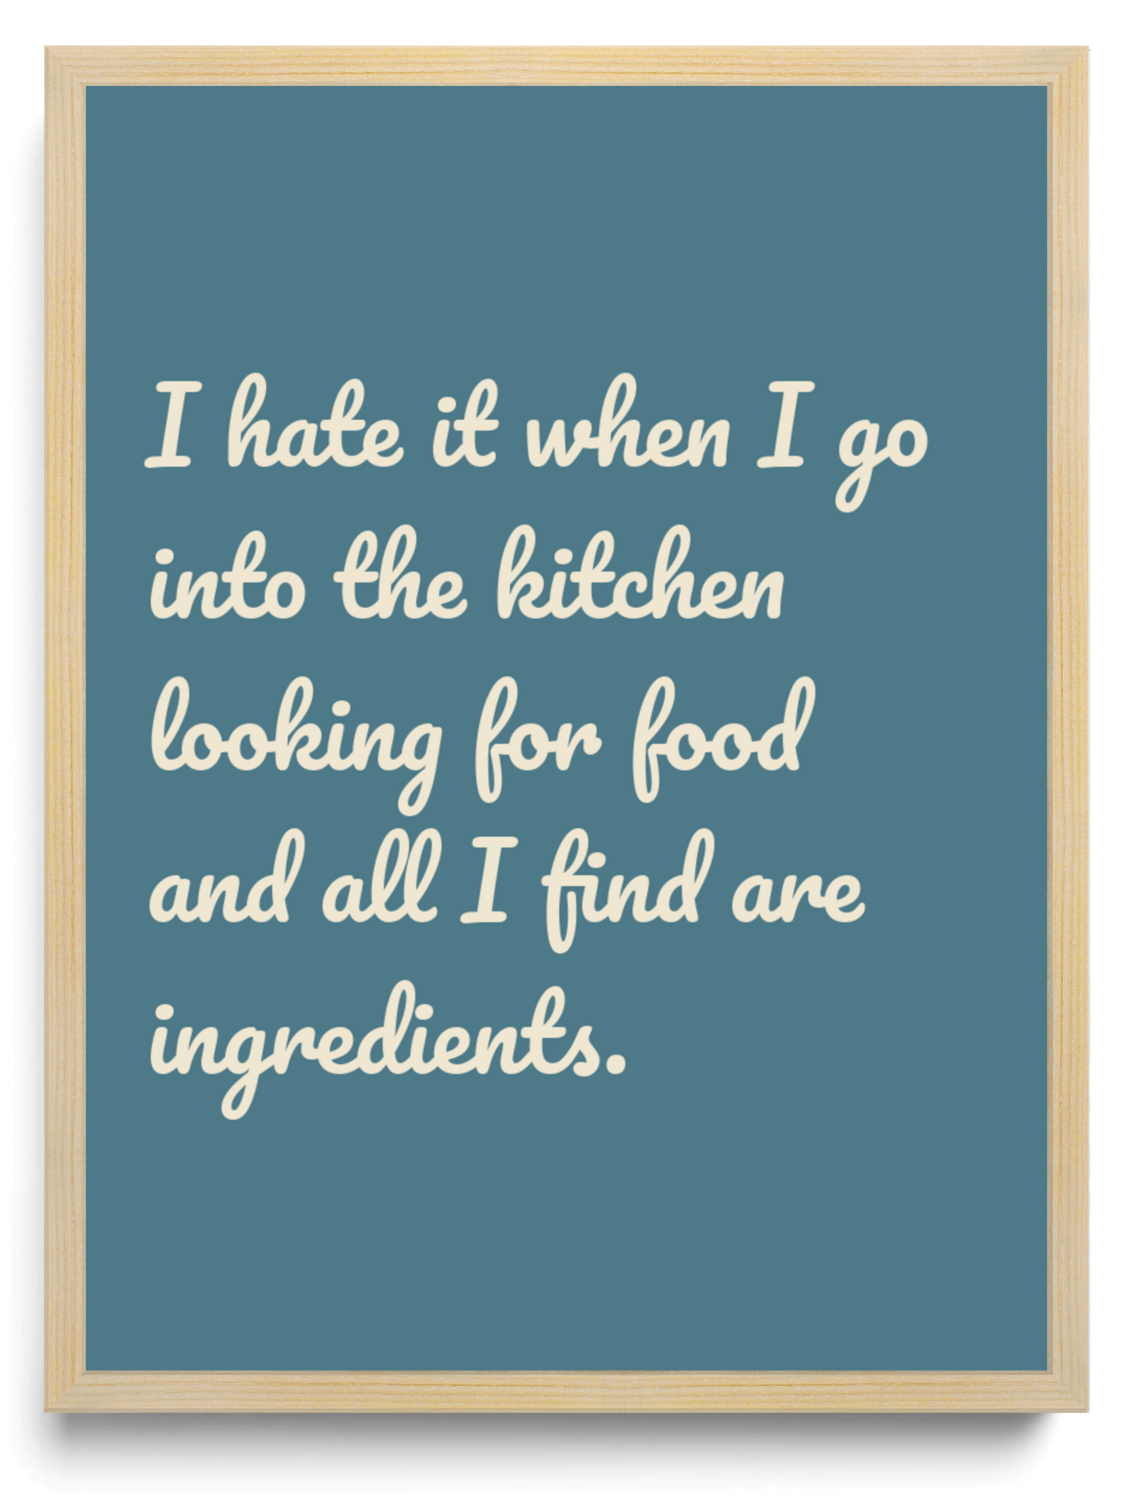 I hate it when I go into the kitchen looking for food and all I find are ingredients.